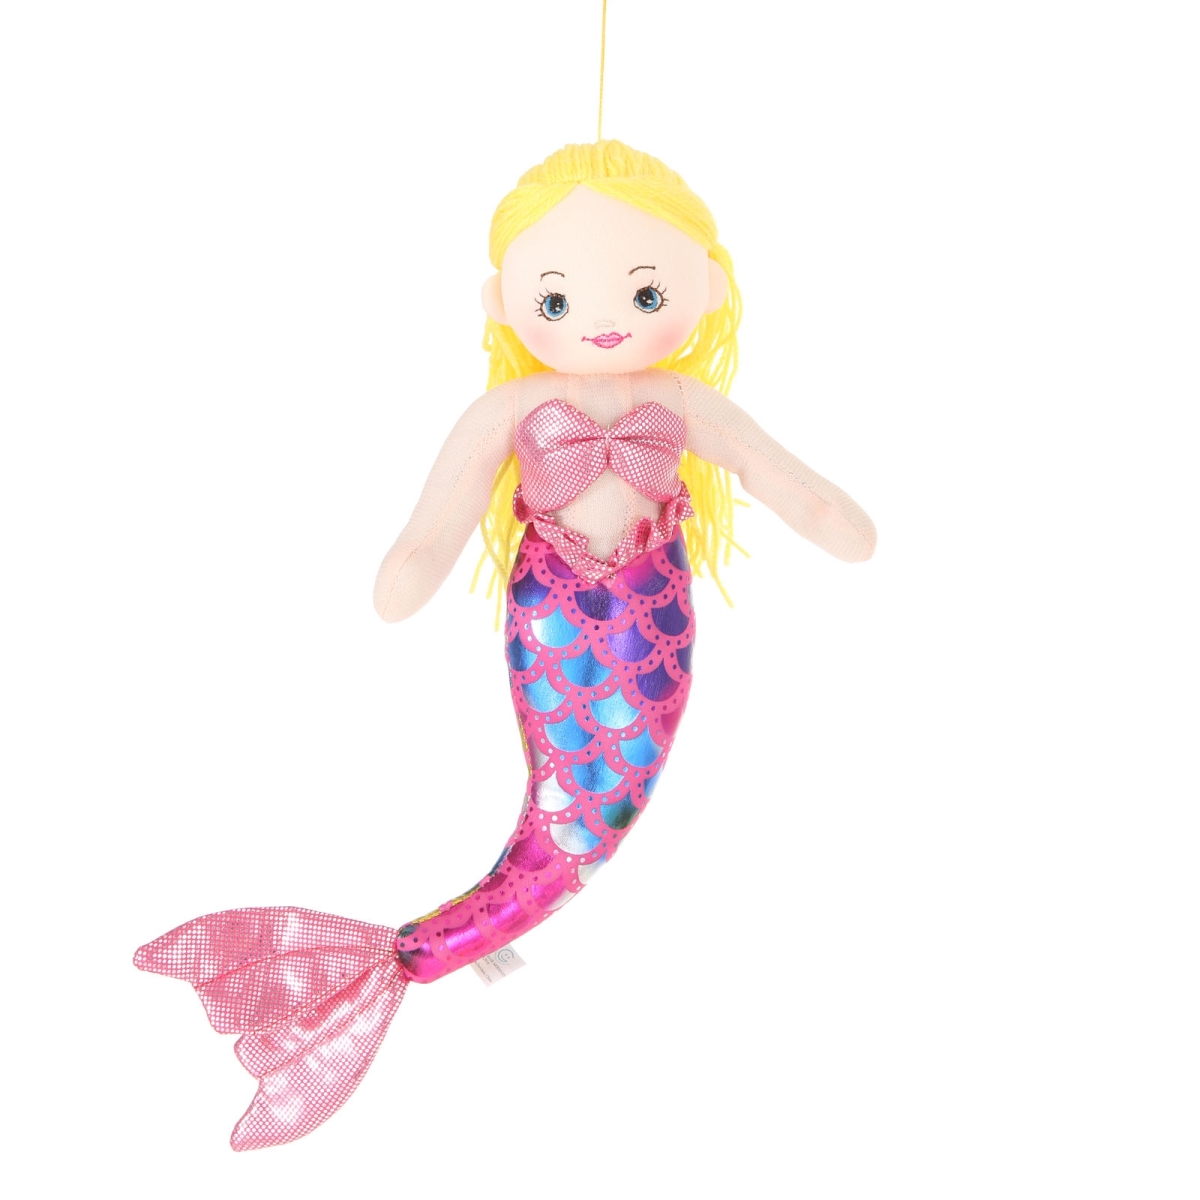 Mm03 16 In. Plush Haired Mermaid Doll - Gold